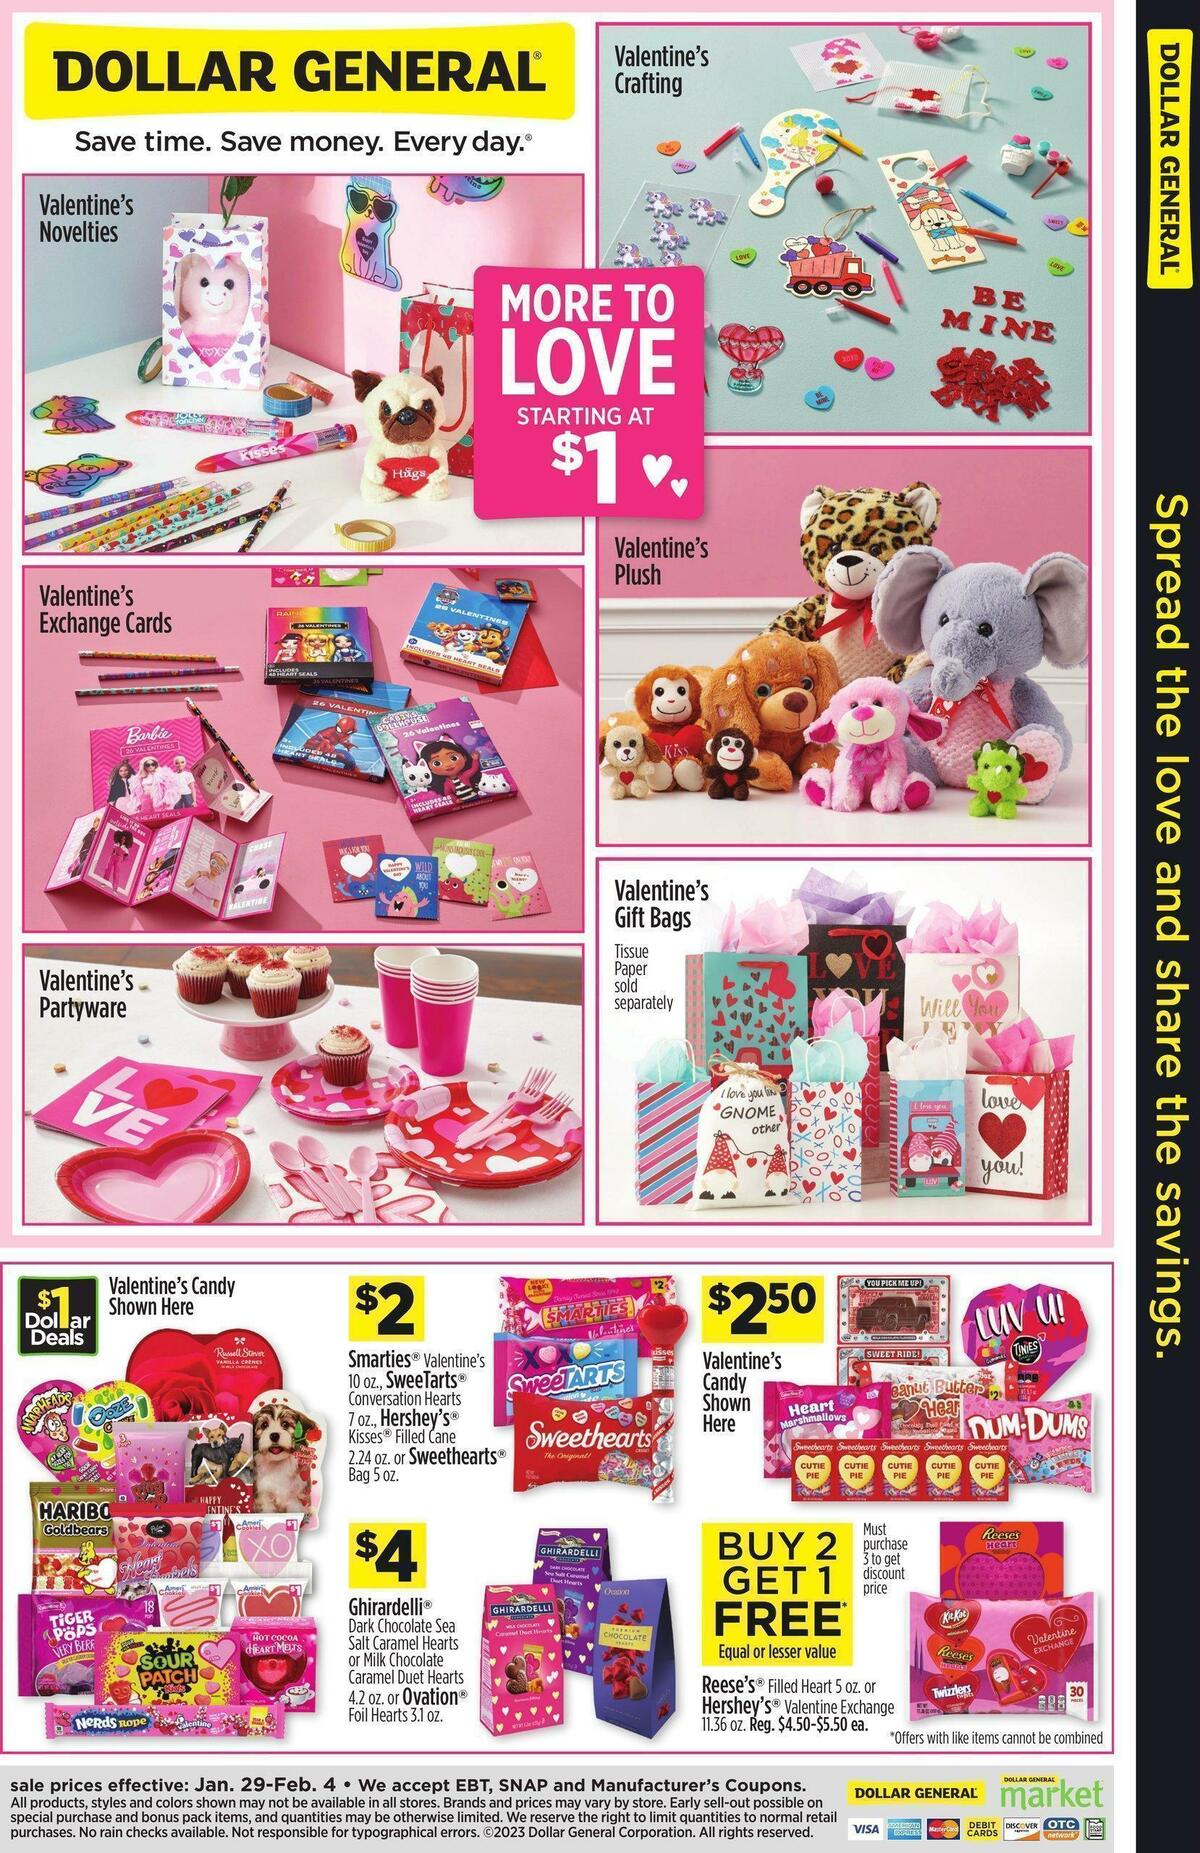 Dollar General Spread the Love and Share the Savings Weekly Ad from January 29